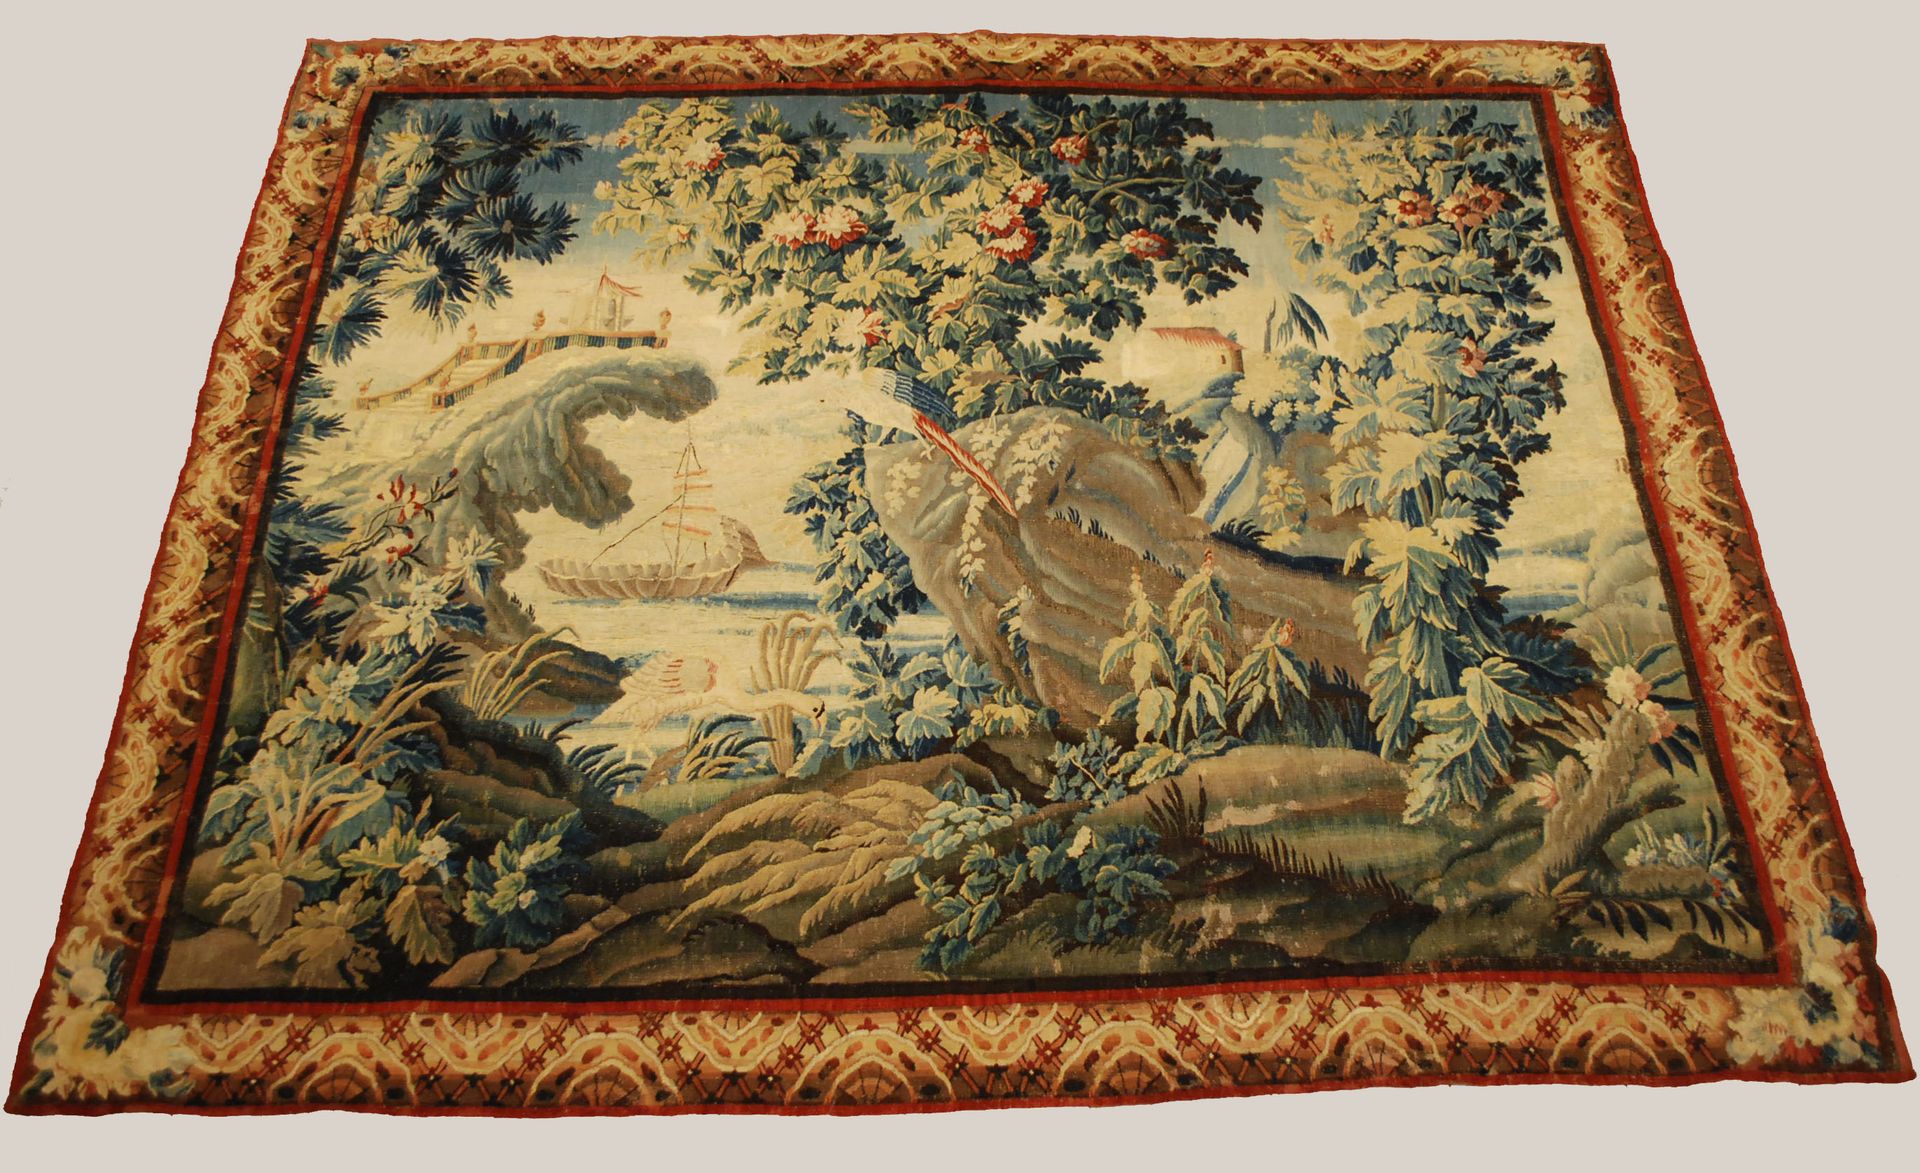 Travail du 17e, attribuée à Bruxelles. Tapestry with birds and wall in backgroun&hellip;